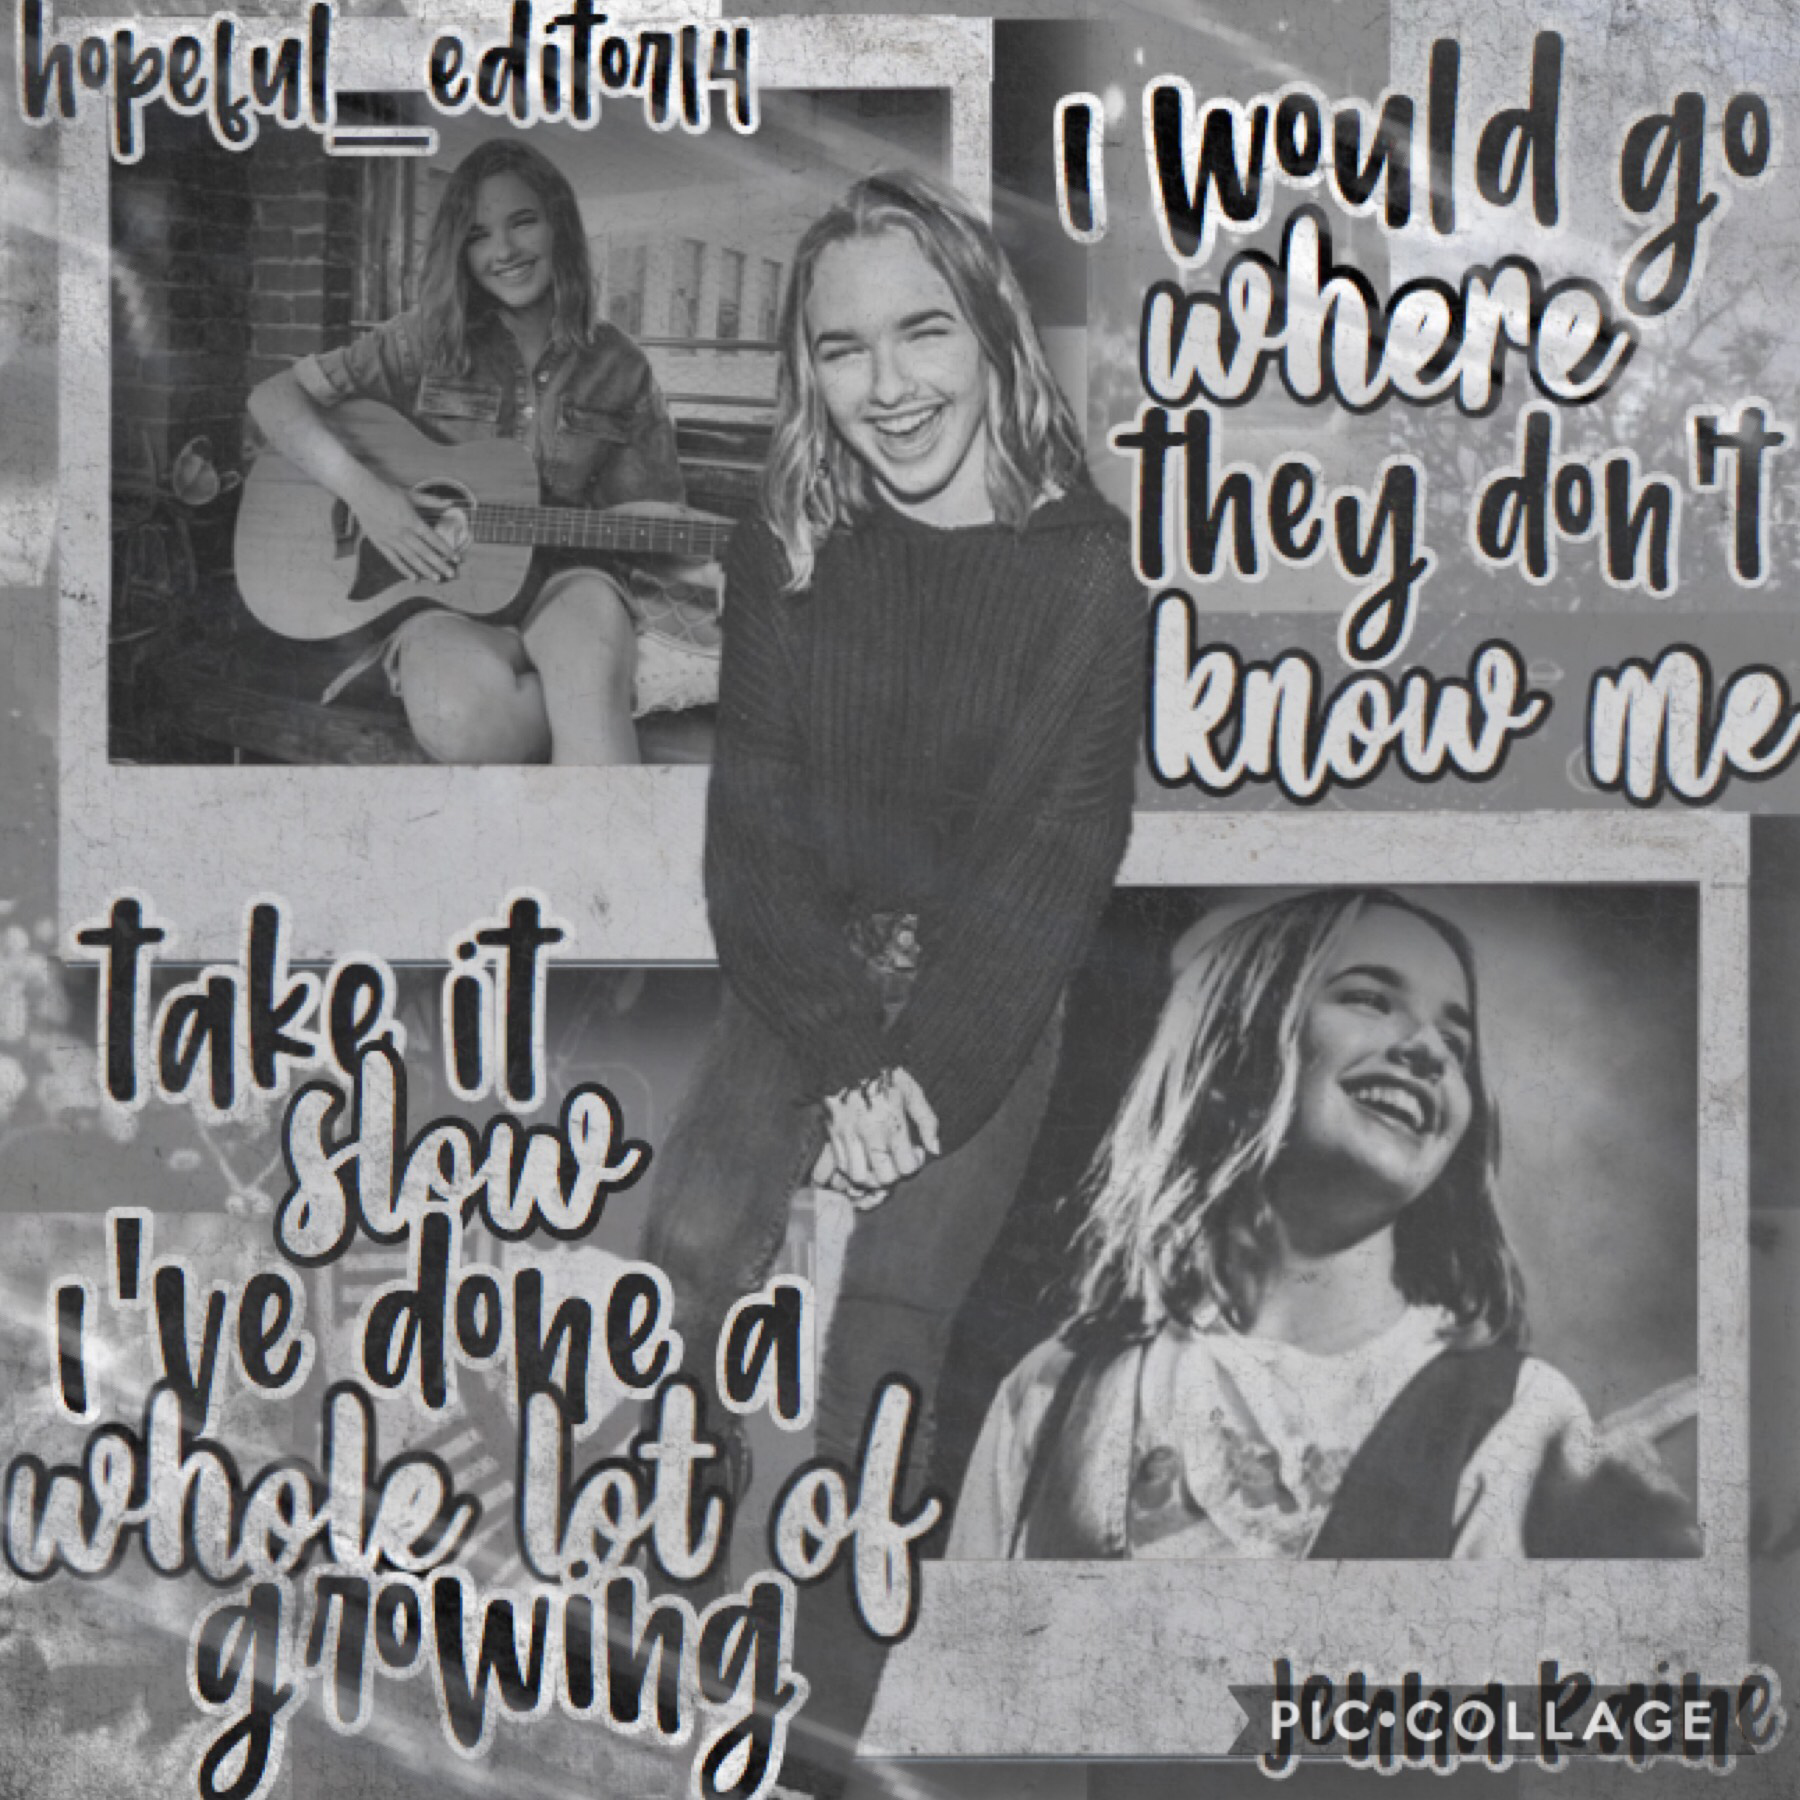 —> t. a. p <—
So, JENNA RAINE HAS NEW MUSIC!
These lyrics are from the song “If I had the summer” which I love so much!! I’m really not exaggerating when I say I listened to them nonstop yesterday. Please join the games on hopeful_fandoms! And icon contes